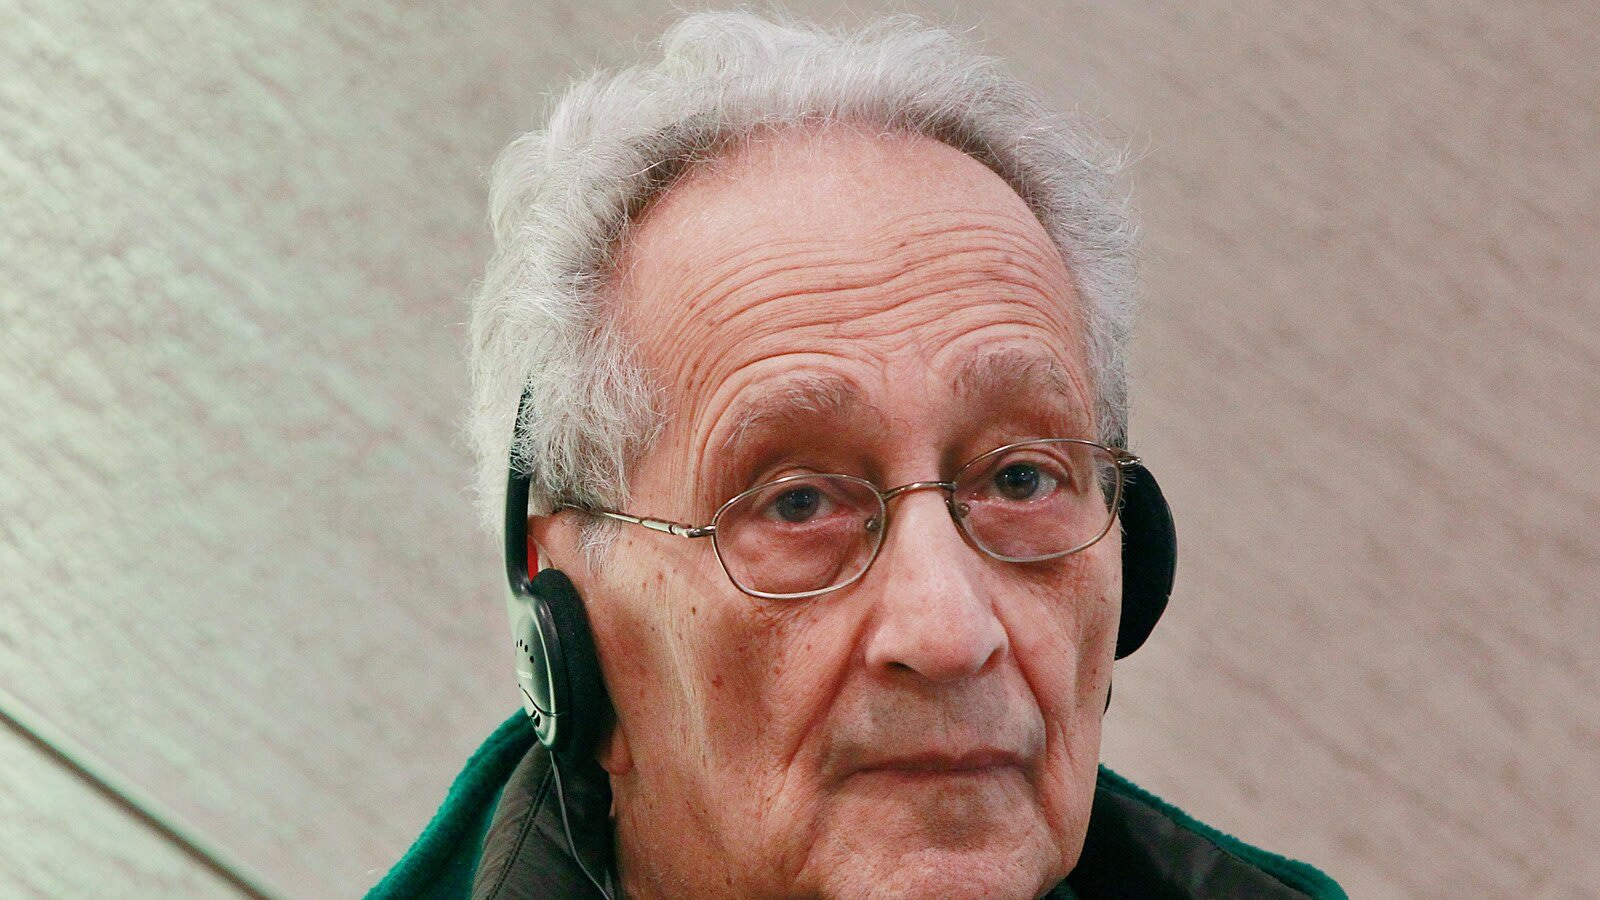 Frank Stella, artist who blurred lines between painting and sculpture, dies at 87